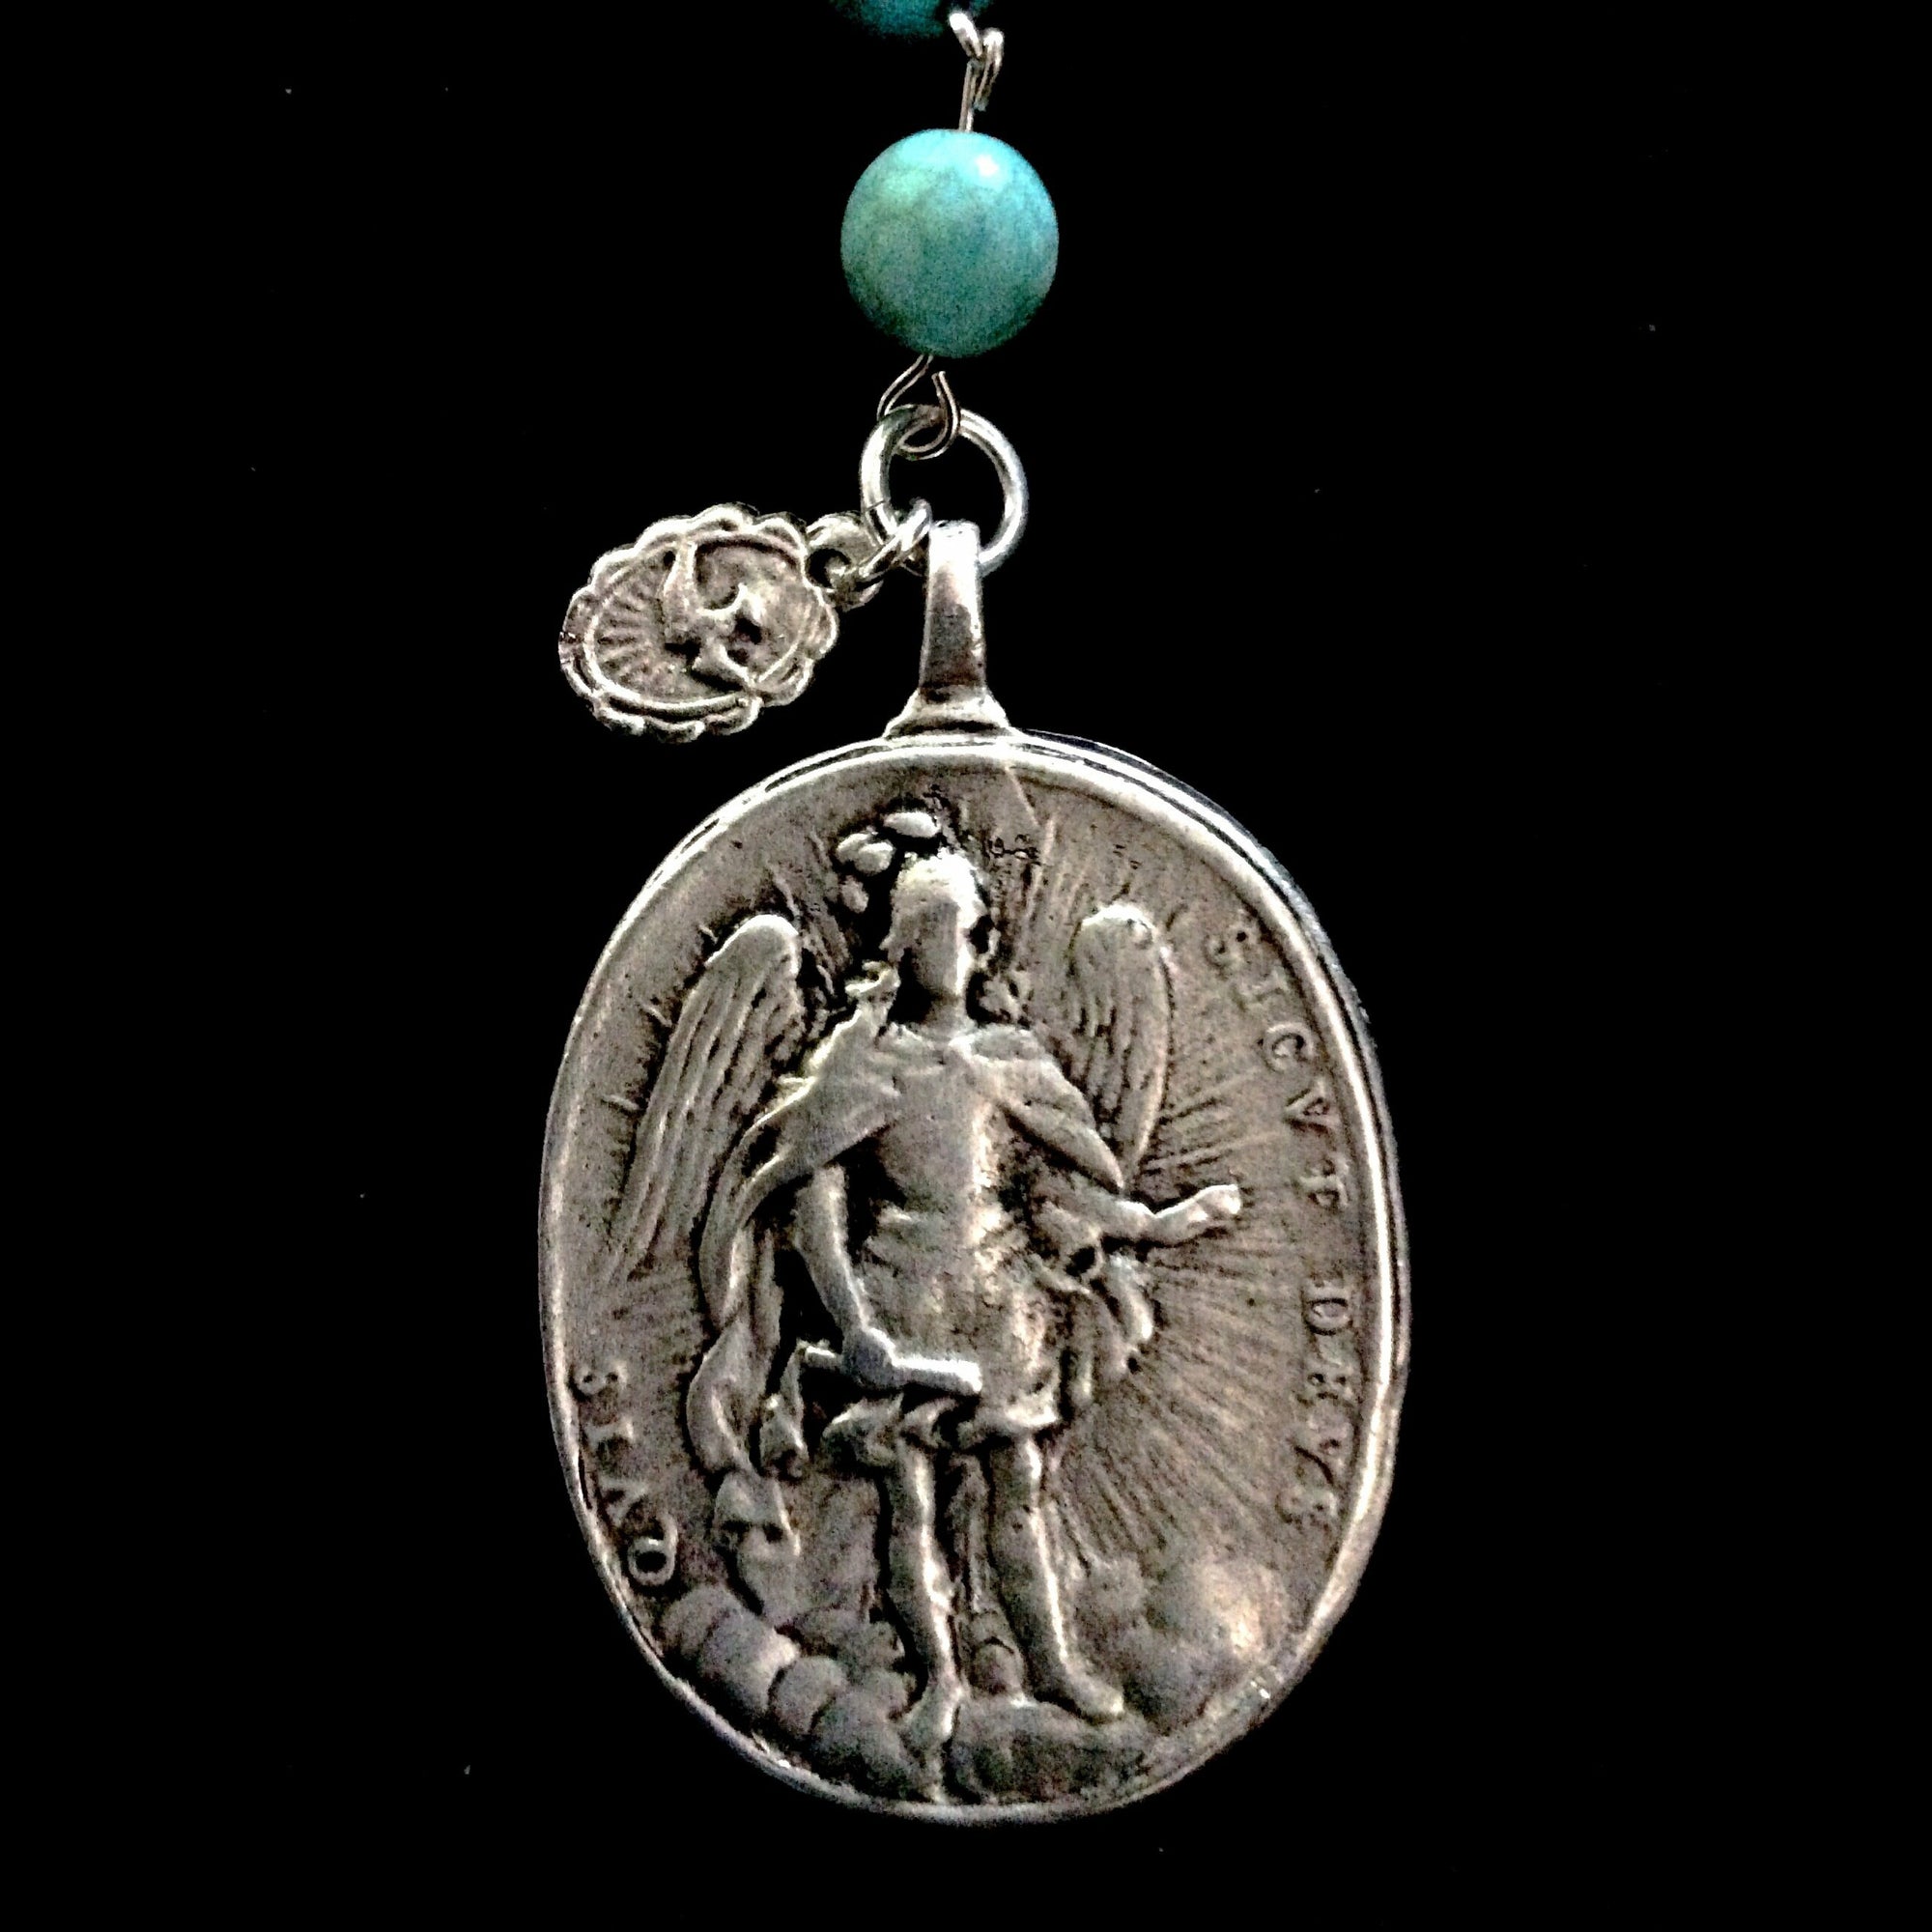 Cristo Rey Rosary Necklace with Saint Michael & Guadalupe in Turquoise and Silver